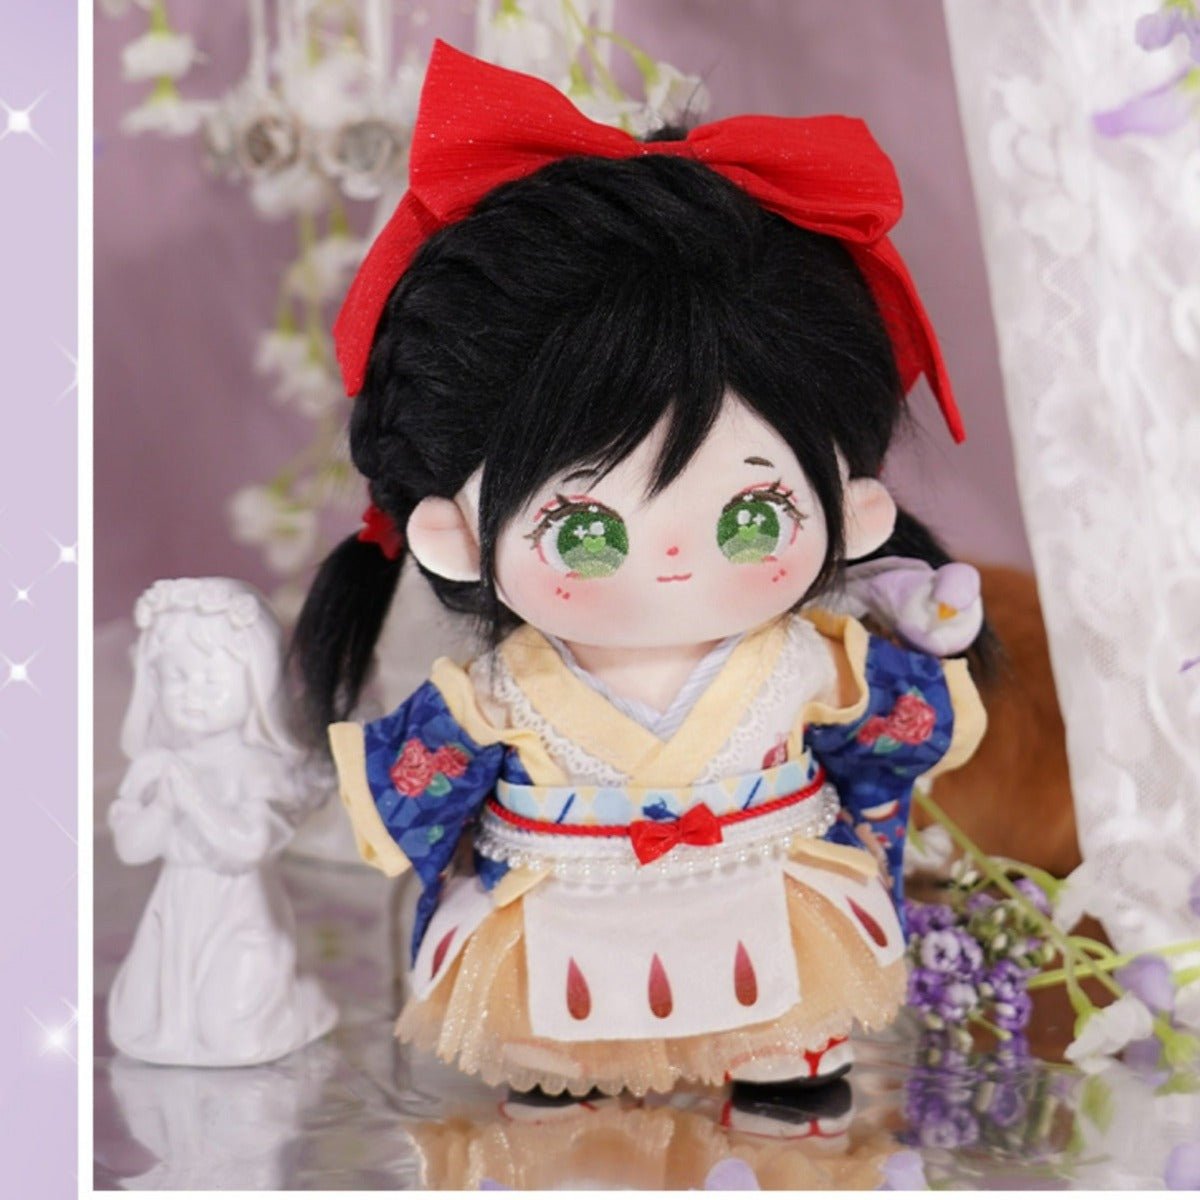 Classic Snow White Cotton Doll And Doll Clothes - TOY-PLU-43401 - omodoki - 42shops